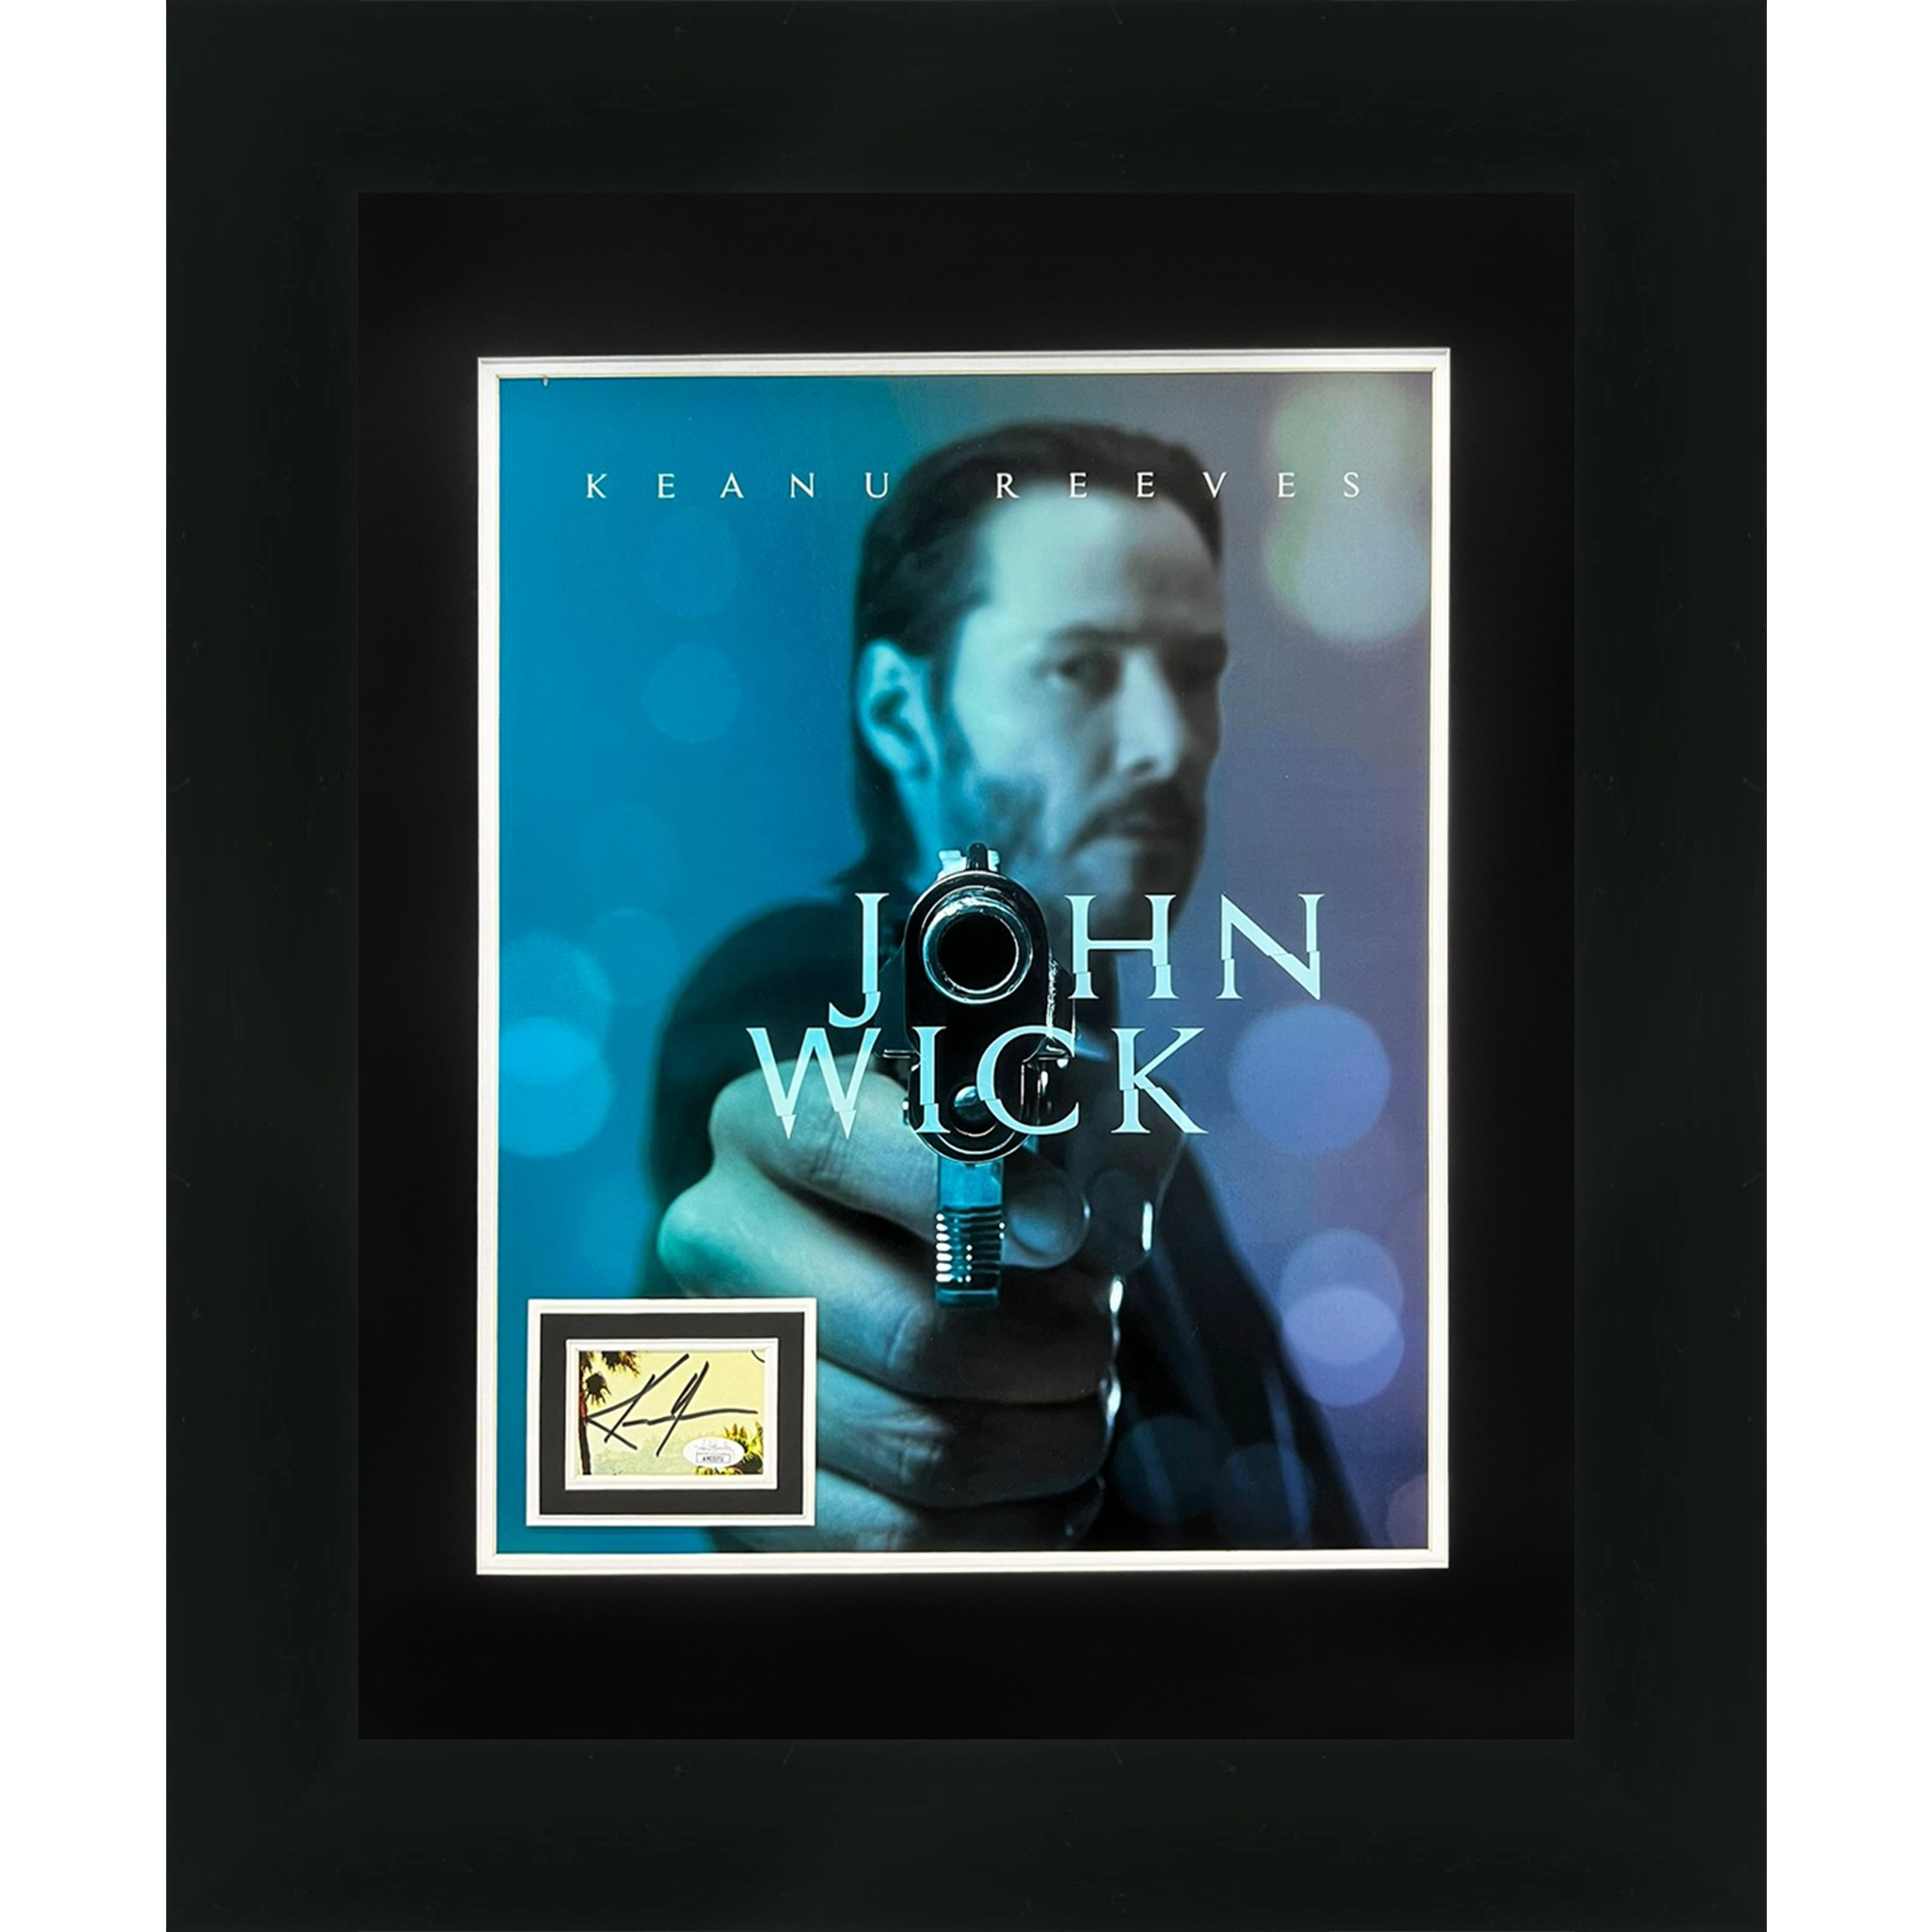 Keanu Reeves Autographed John Wick Deluxe Framed 16x20 Movie Poster Piece JSA